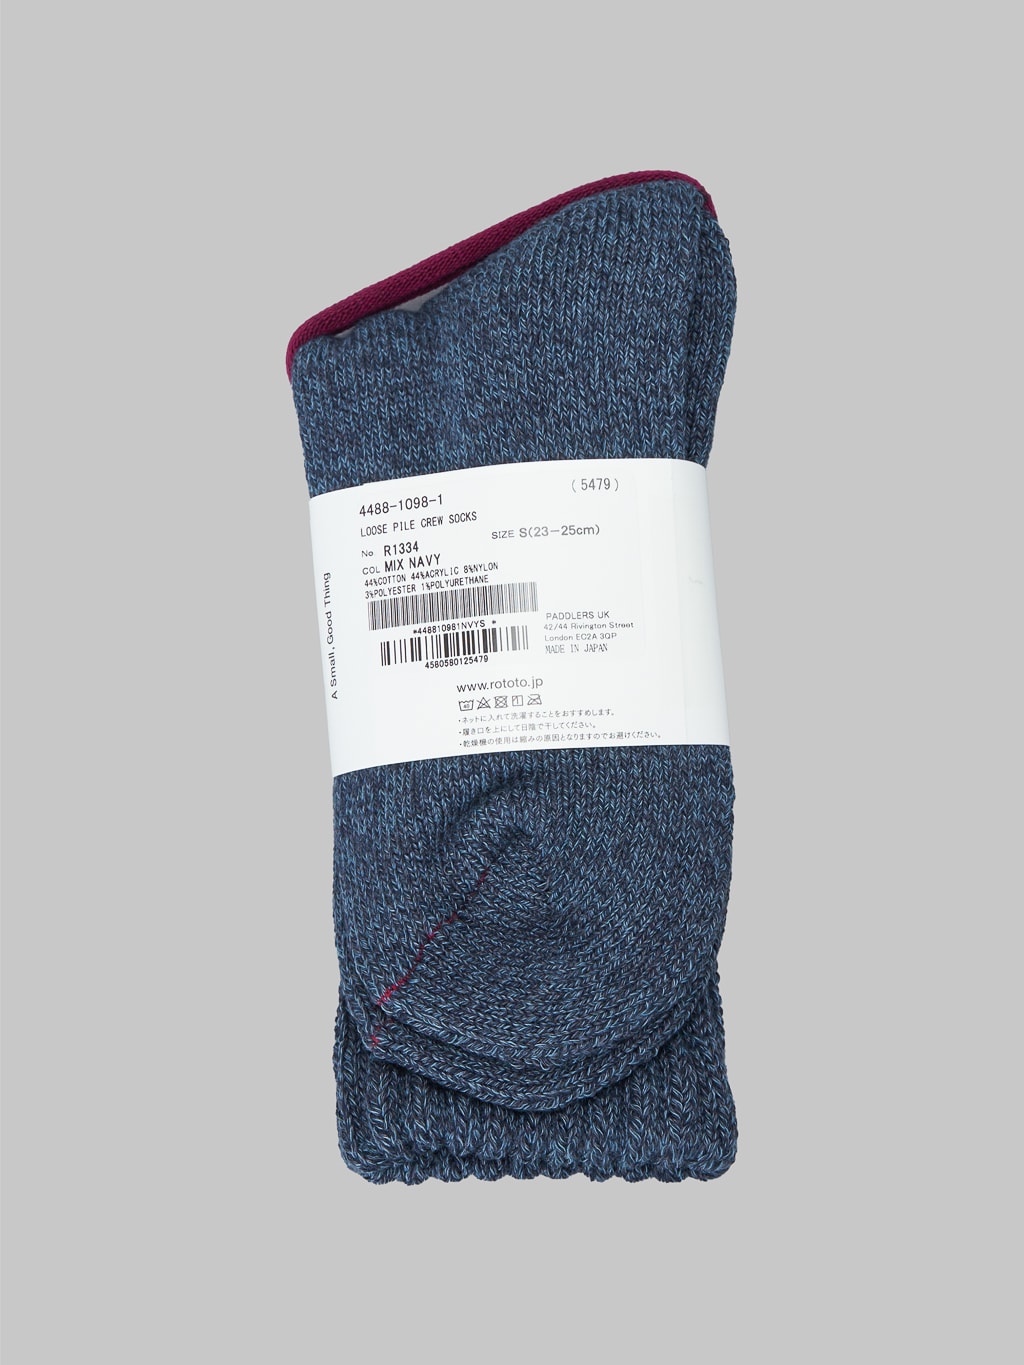 ROTOTO Loose Pile Crew Socks Mix Navy composition